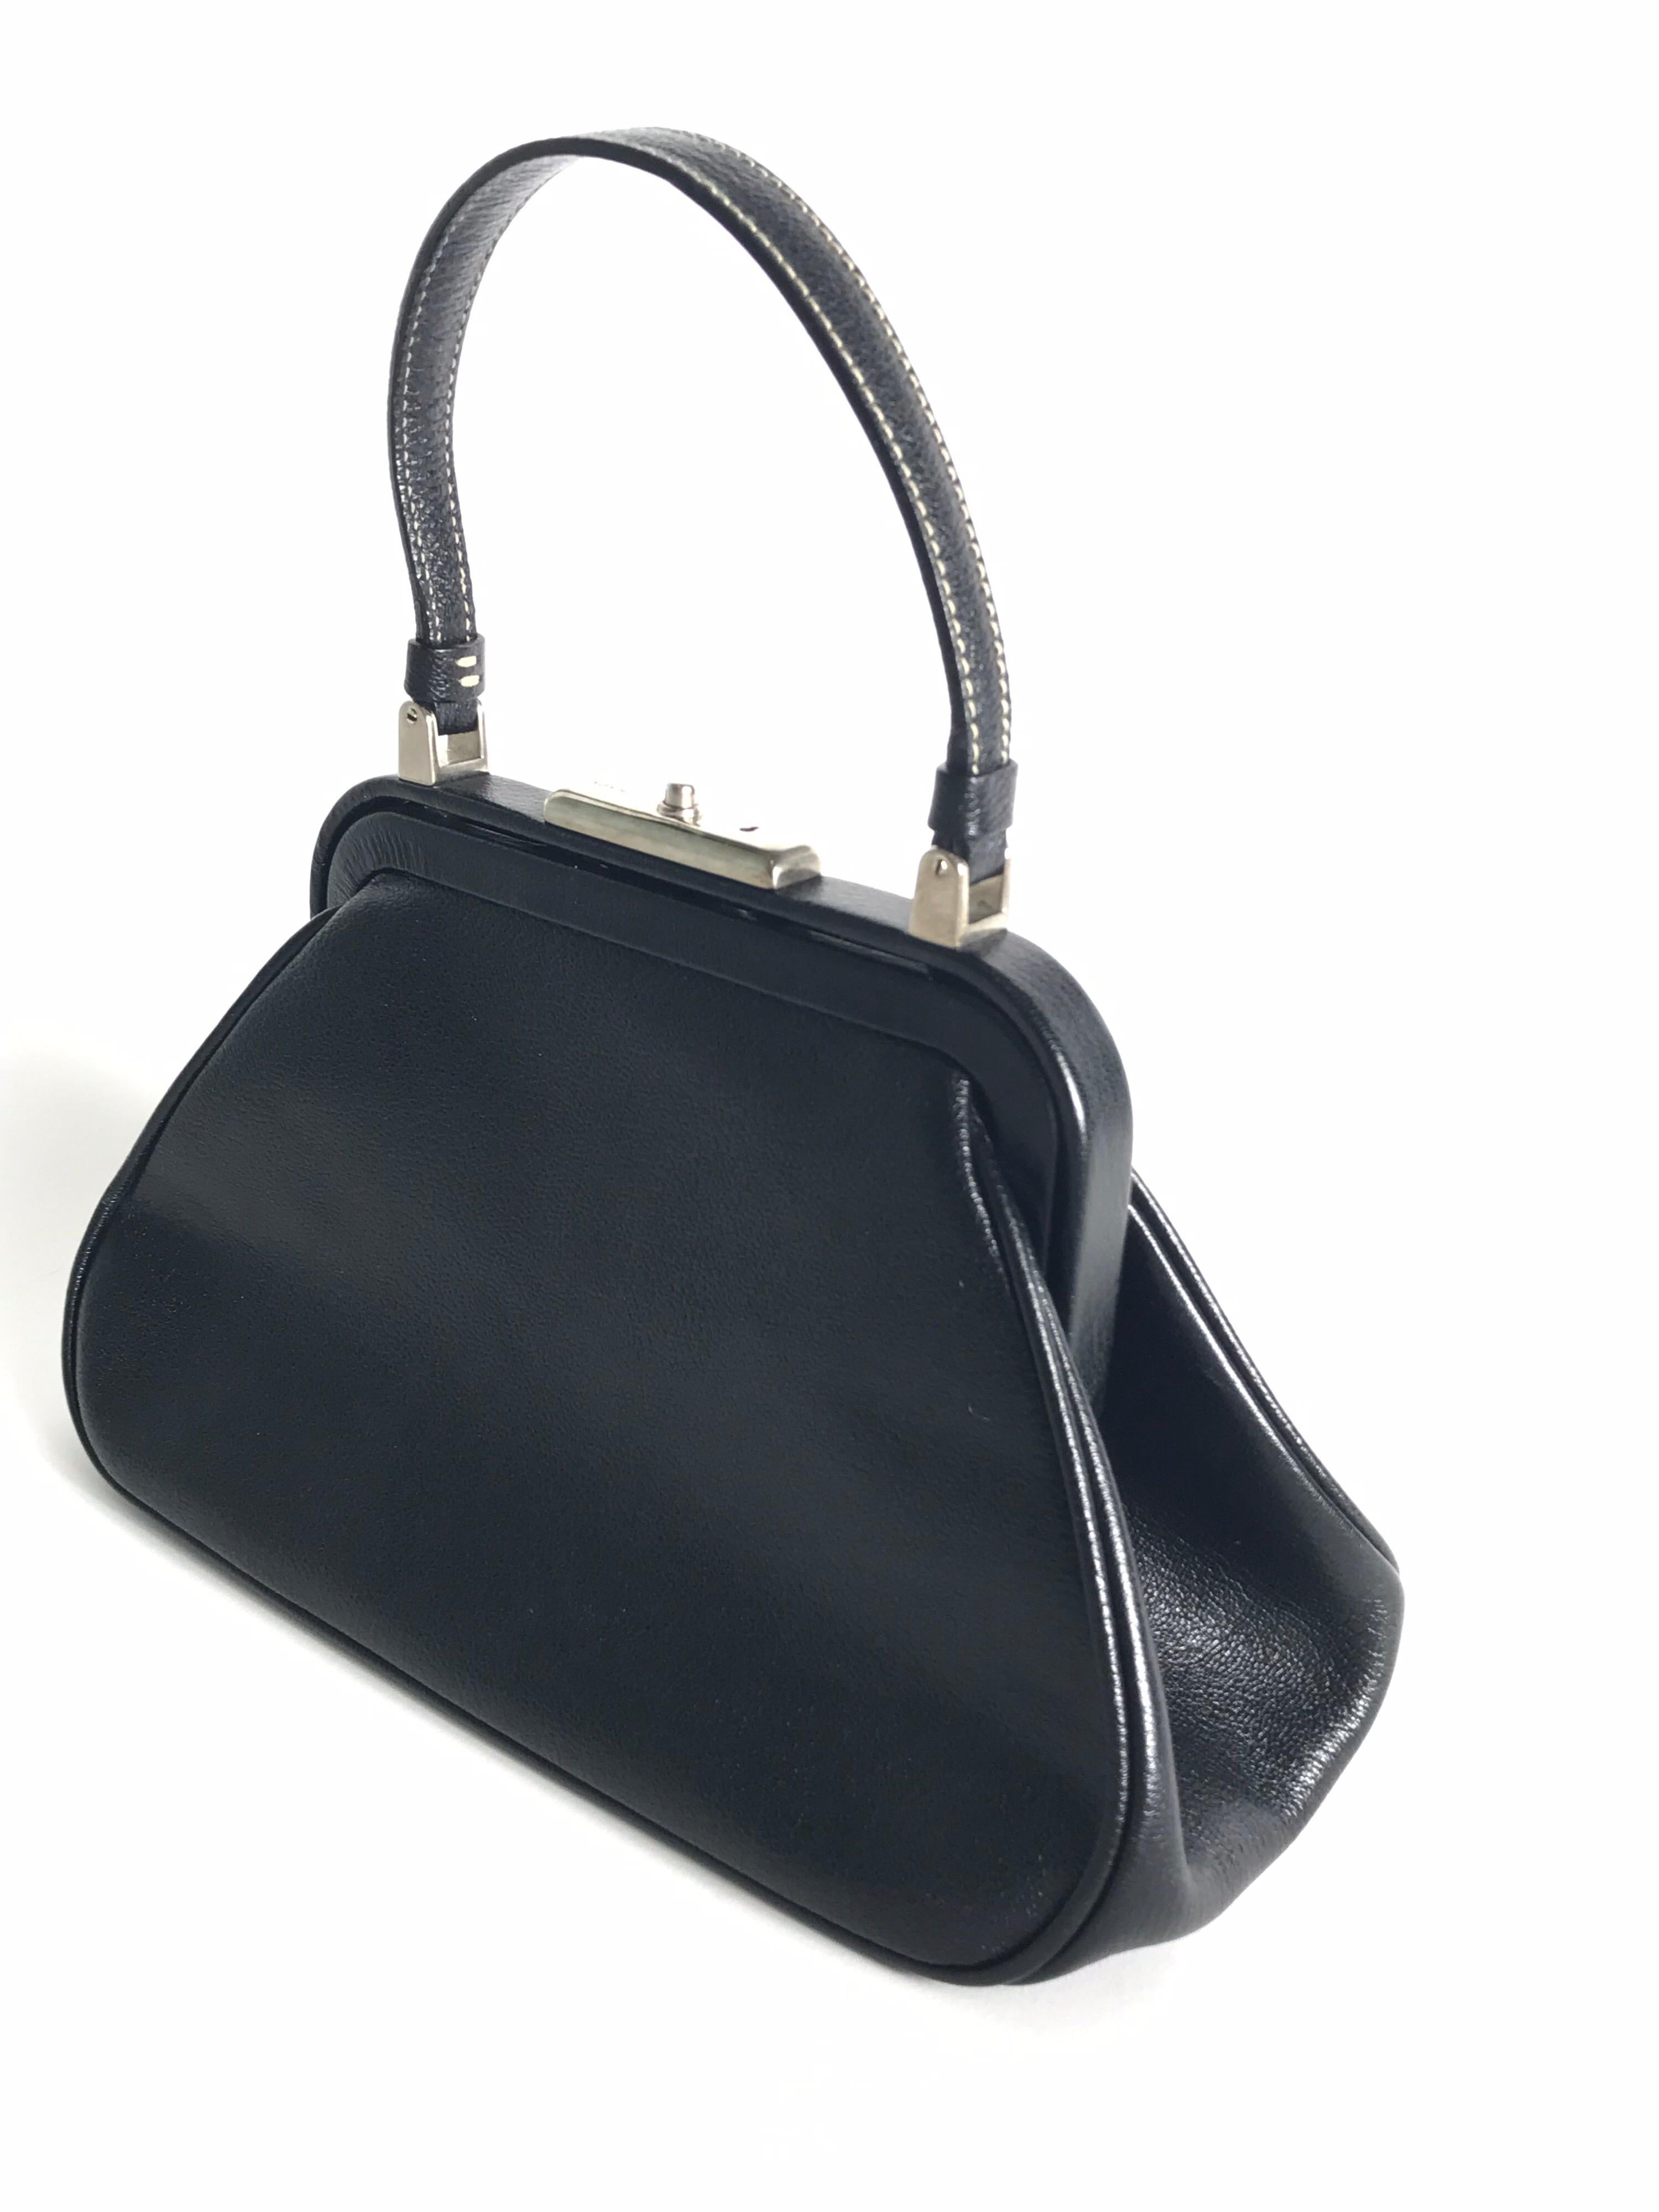 Black leather Prada mini frame bag with silver-tone hardware, creme contrast stitching throughout, single flat top handle, tonal logo jacquard lining, single zip pocket at interior wall and push-lock closure at top. Includes keys. Condition: